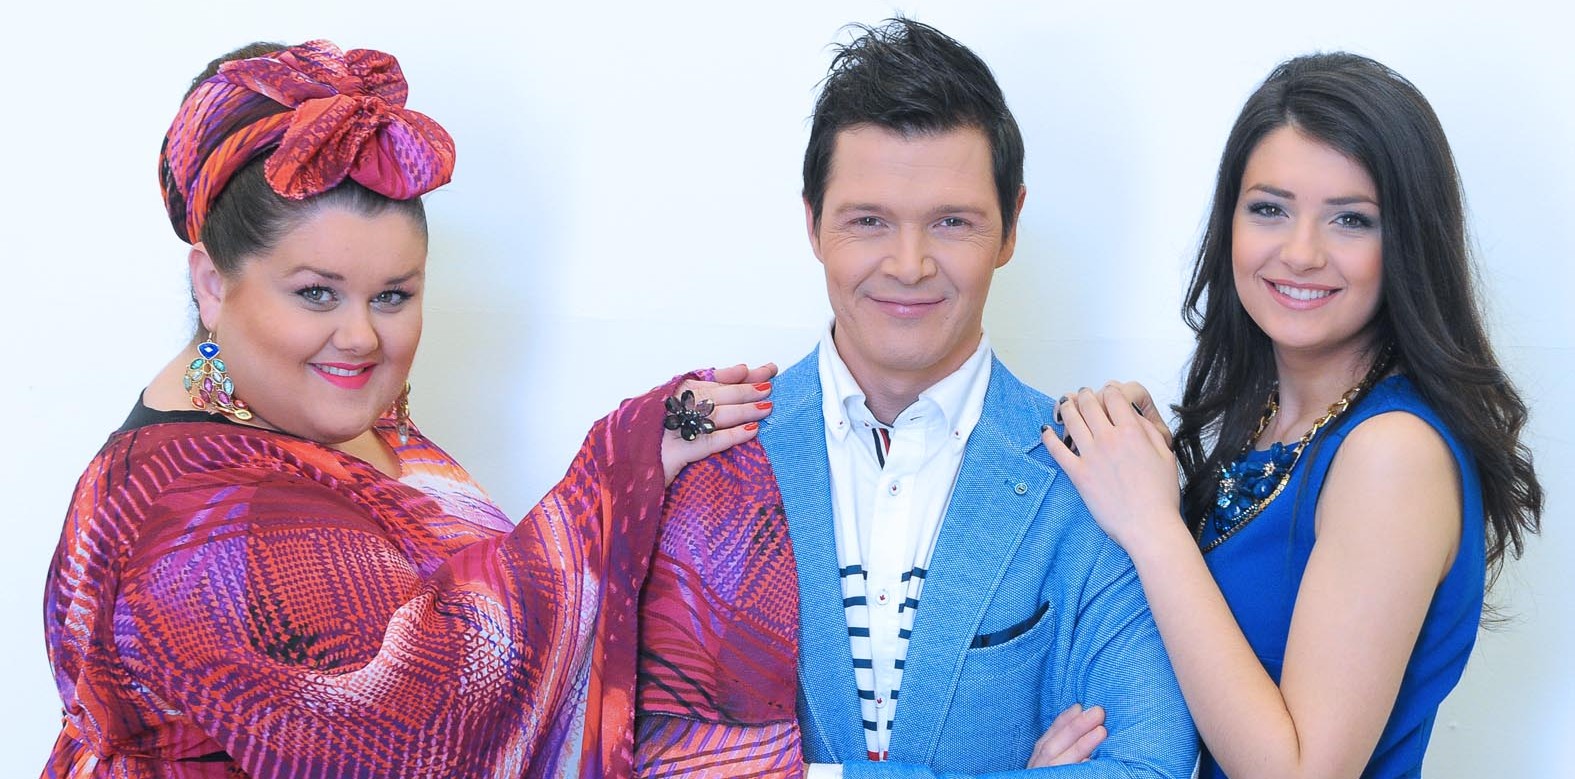 Serbia: Two shows for national selection